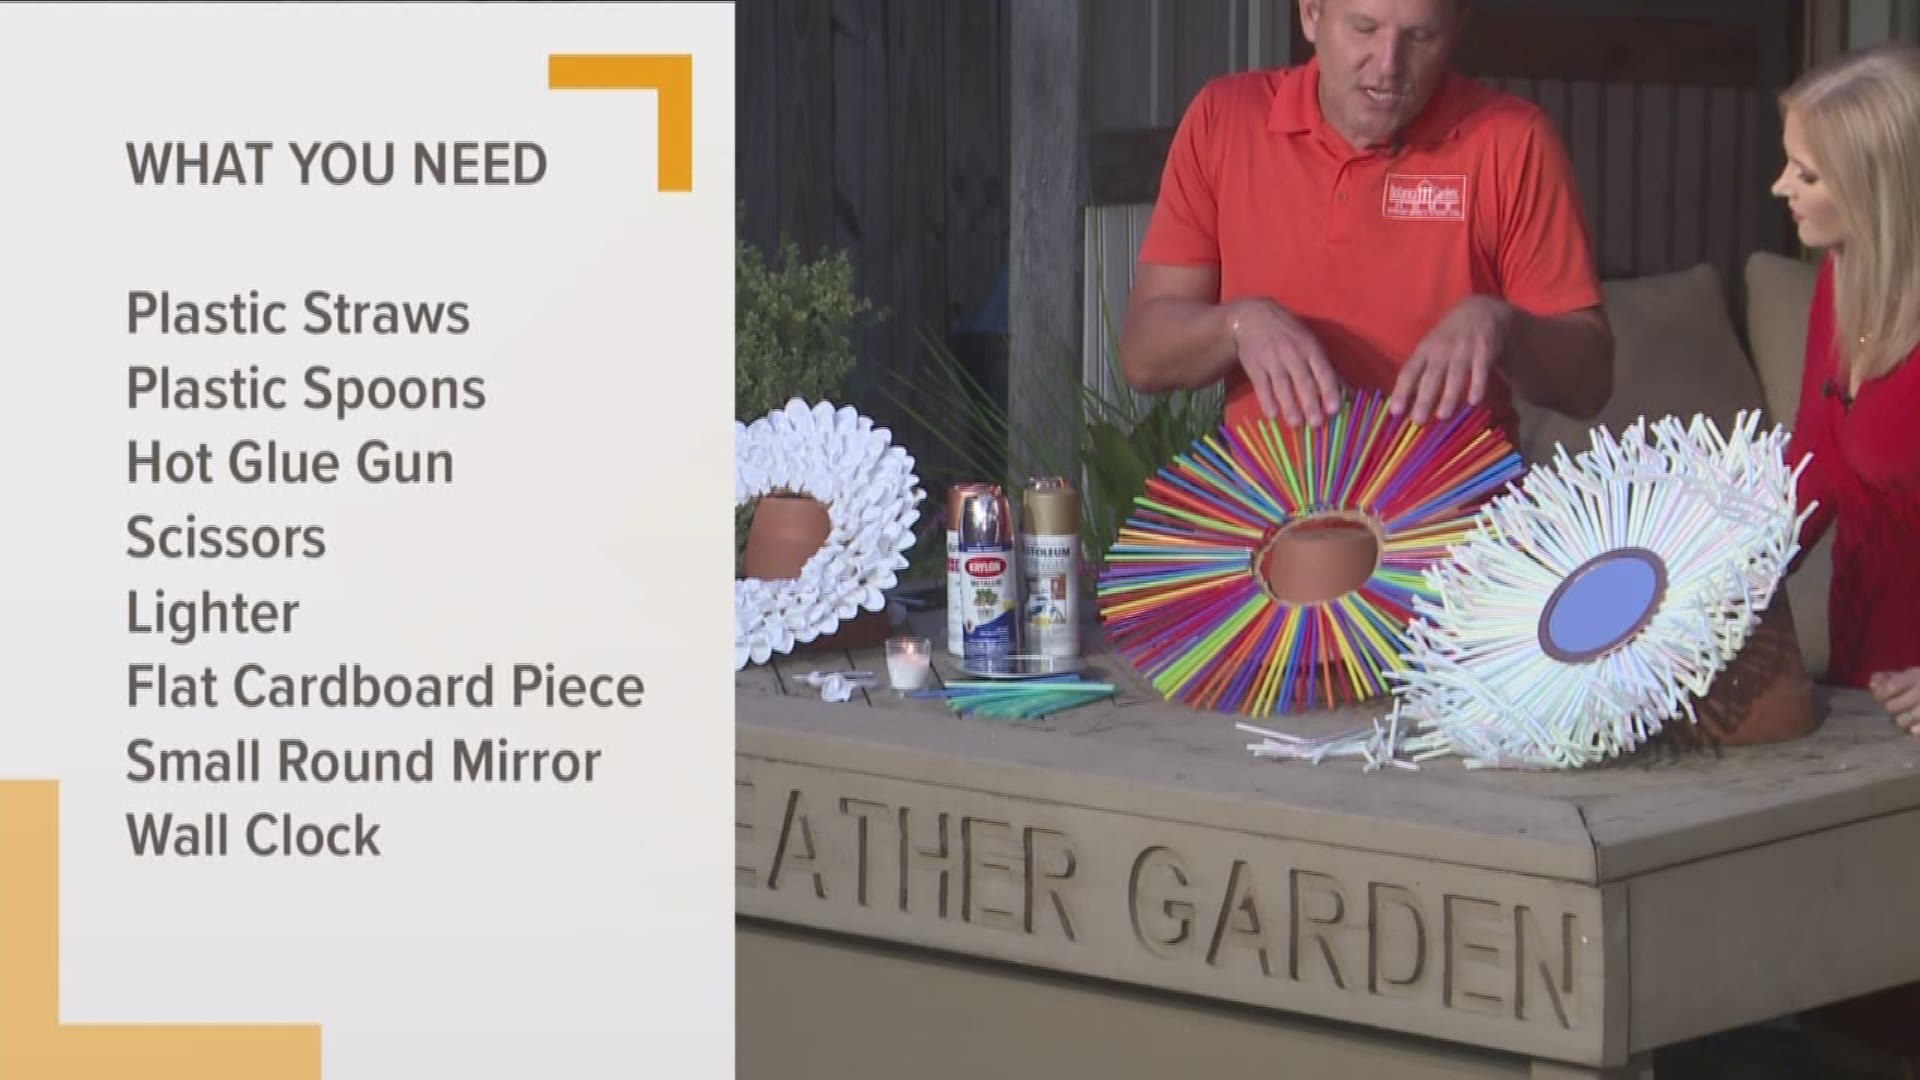 Chris Olsen shows us how to make elegant decor with everyday items.